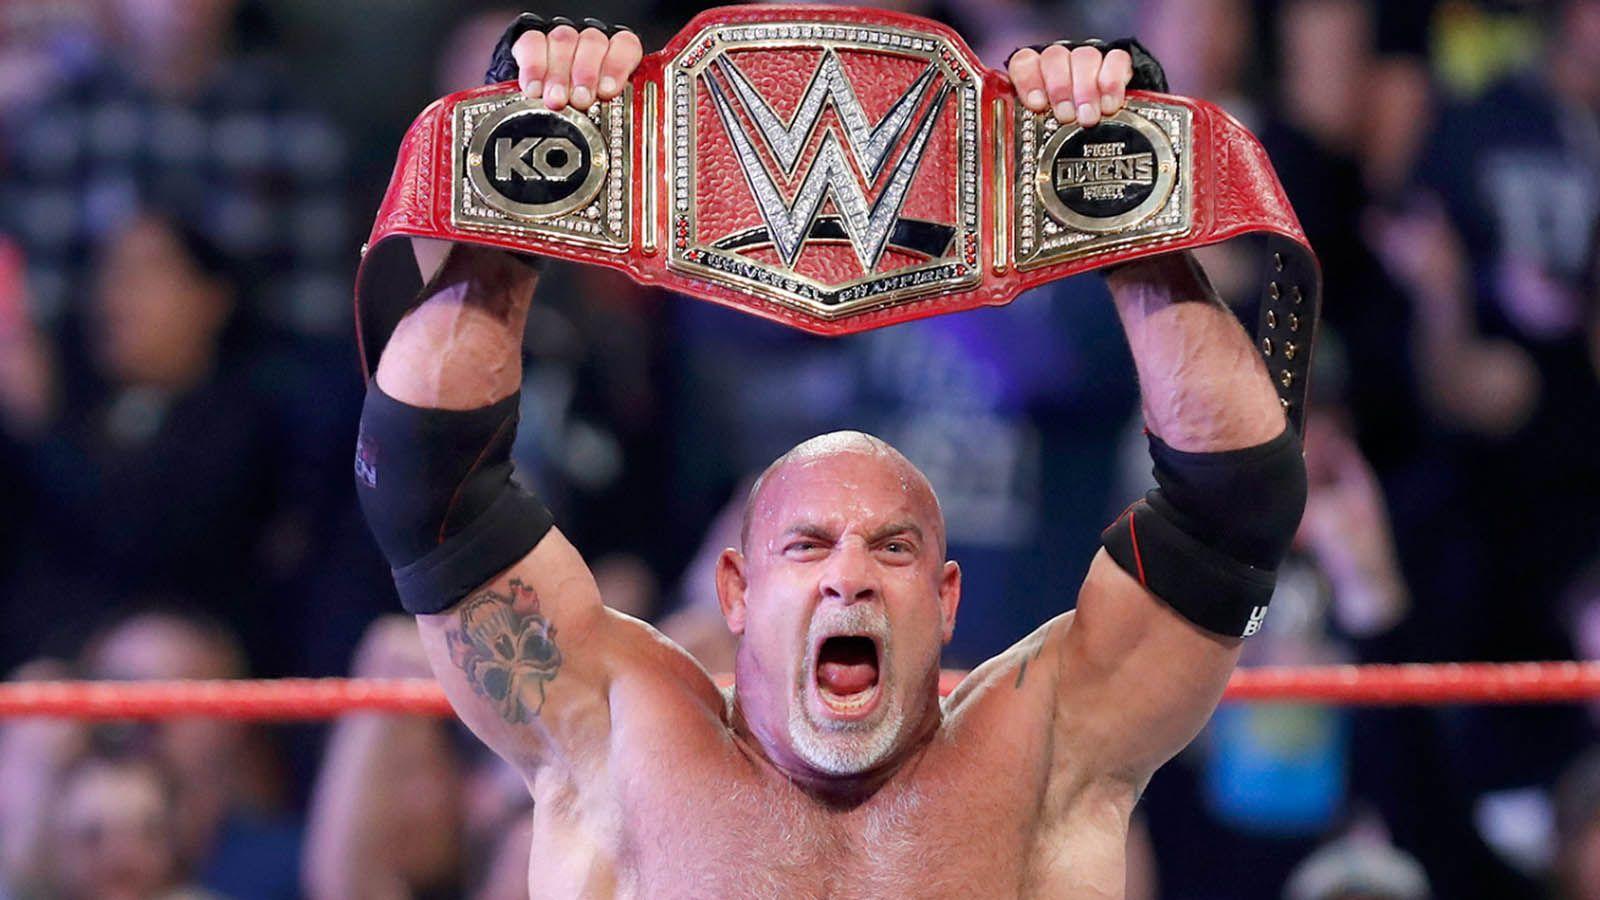 GOLDBERG TO BE INDUCTED INTO WWE HALL OF FAME!